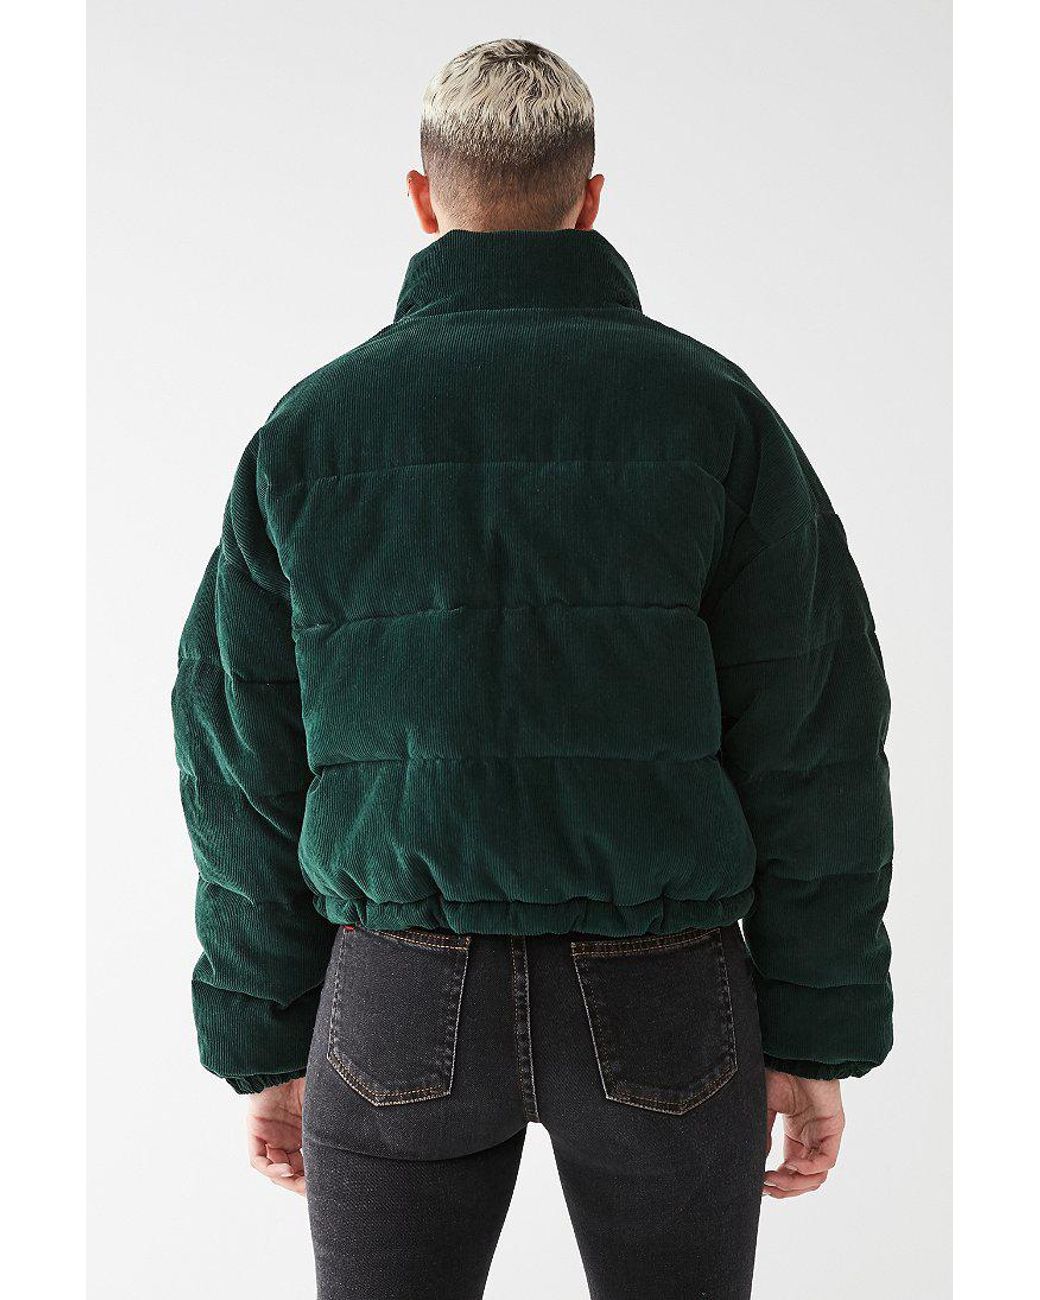 Urban Outfitters Uo Corduroy Puffer Jacket in Green | Lyst